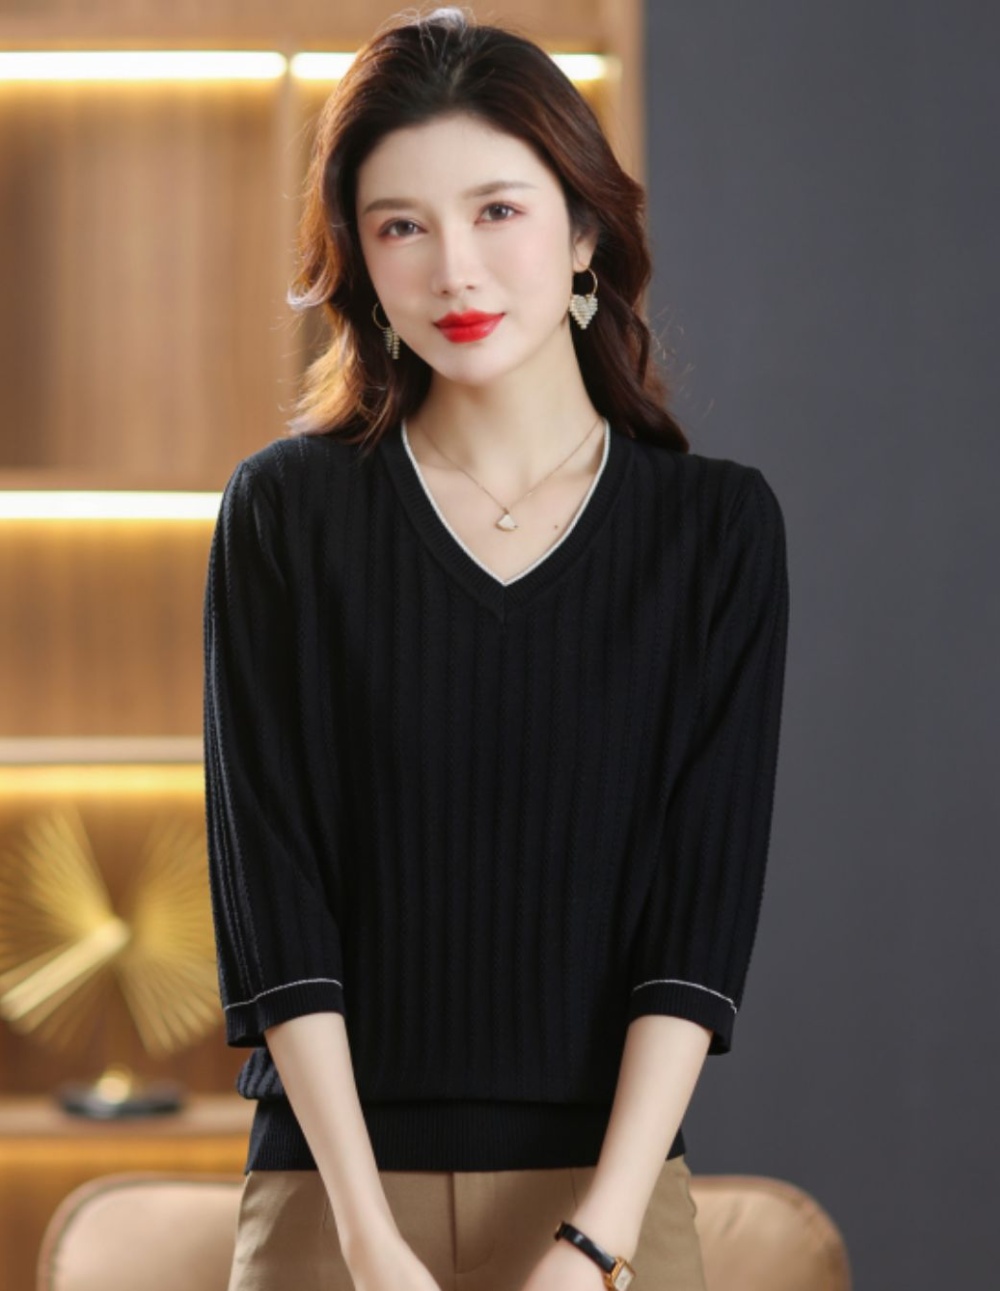 Loose Western style sweater thin T-shirt for women